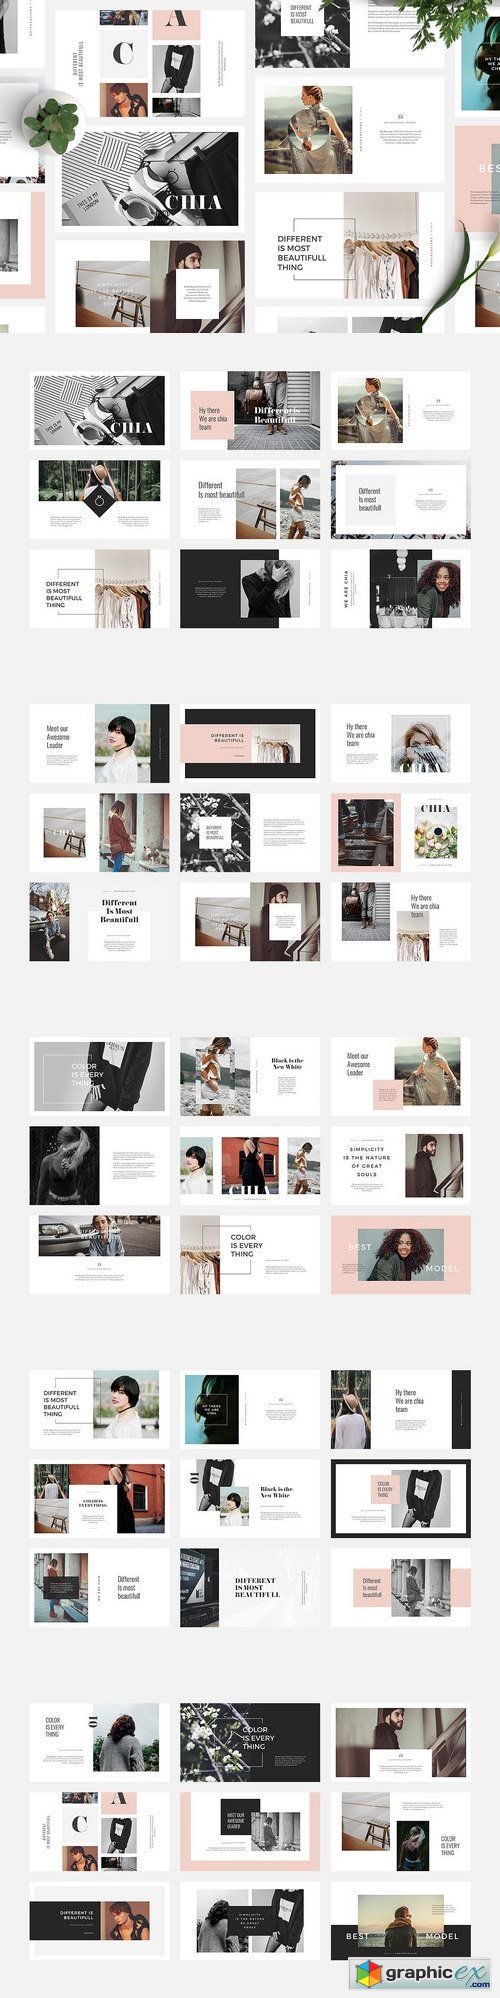 CHIA | PowerPoint Template